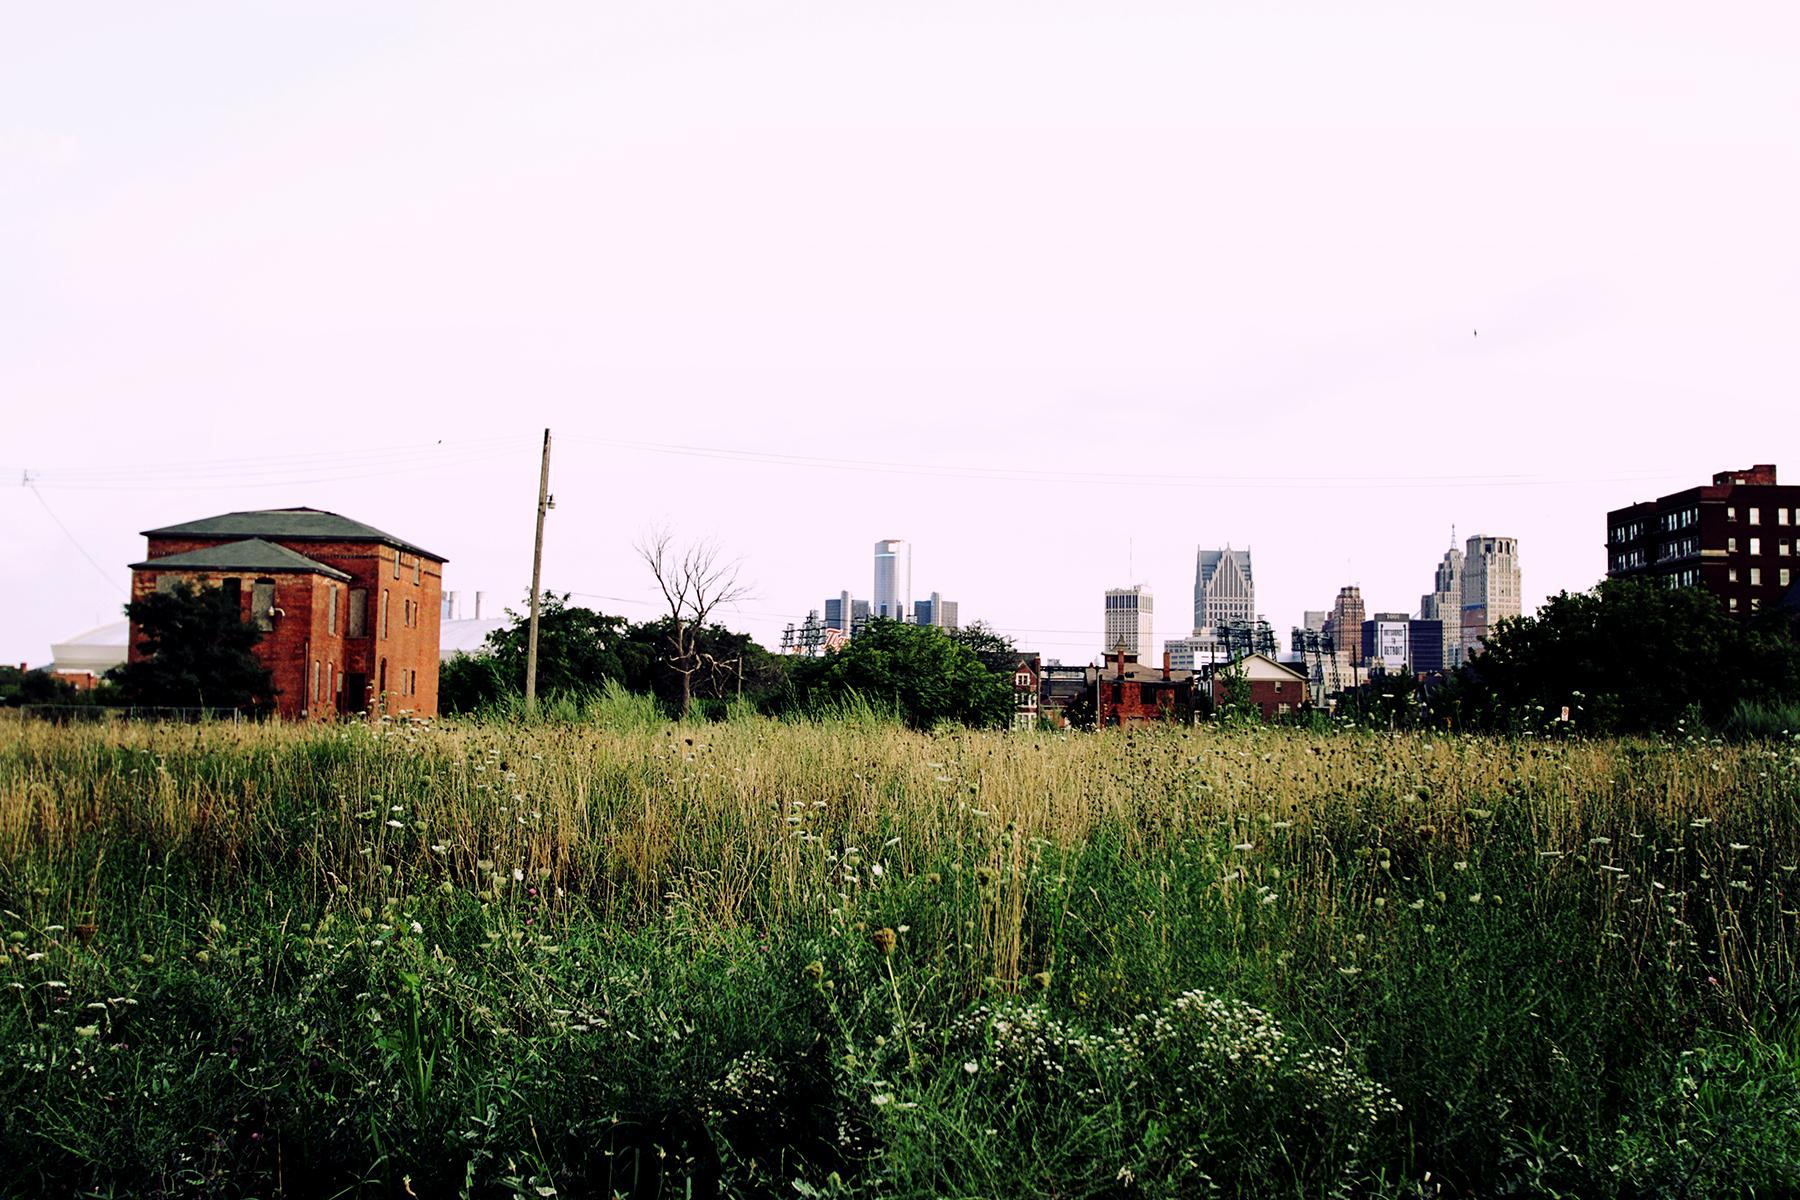 Grass on an empty lot, with city skyline in the background